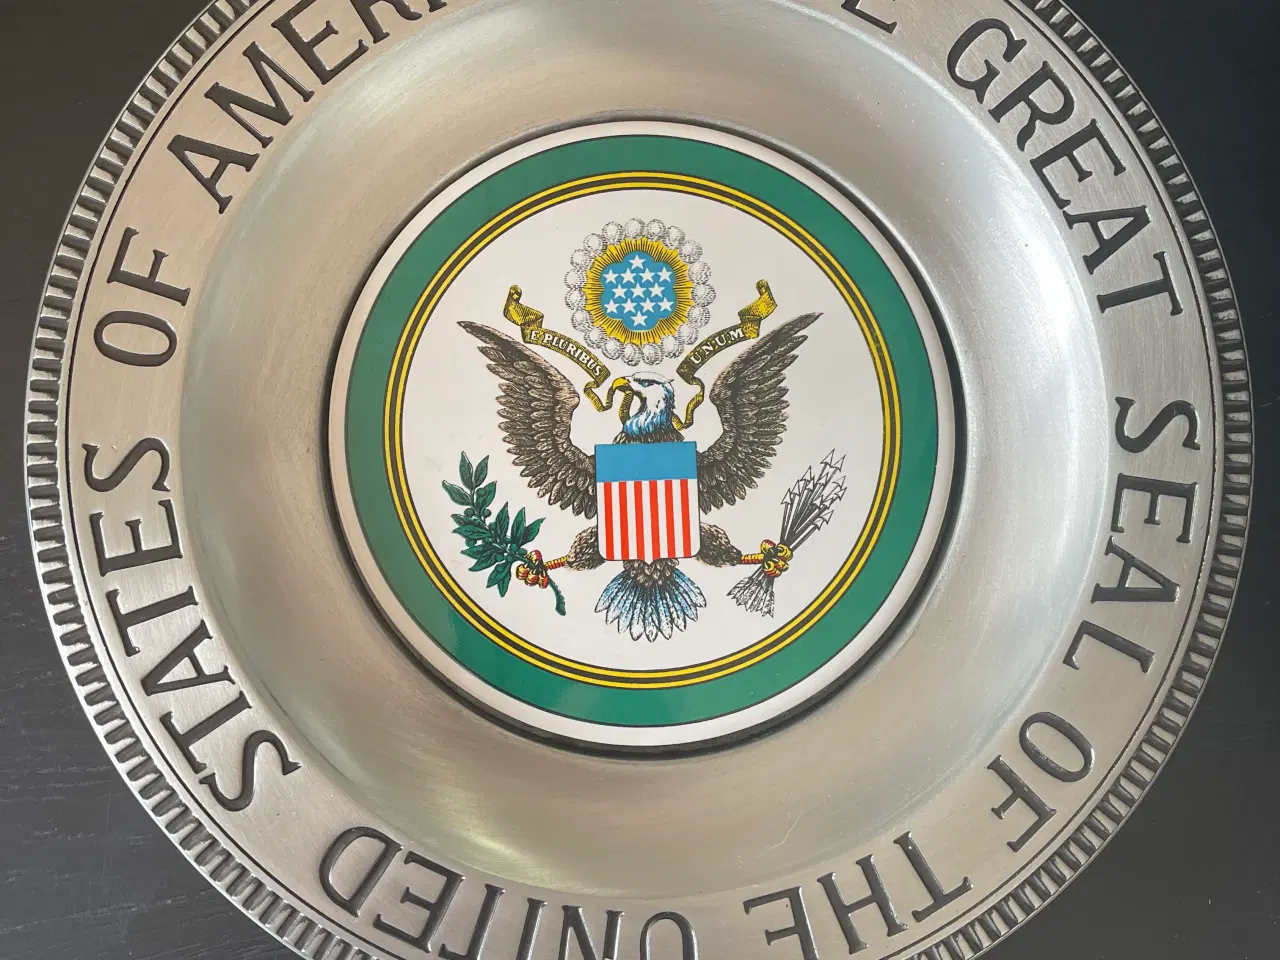 Billede 1 - The Great Seal of the United States of America